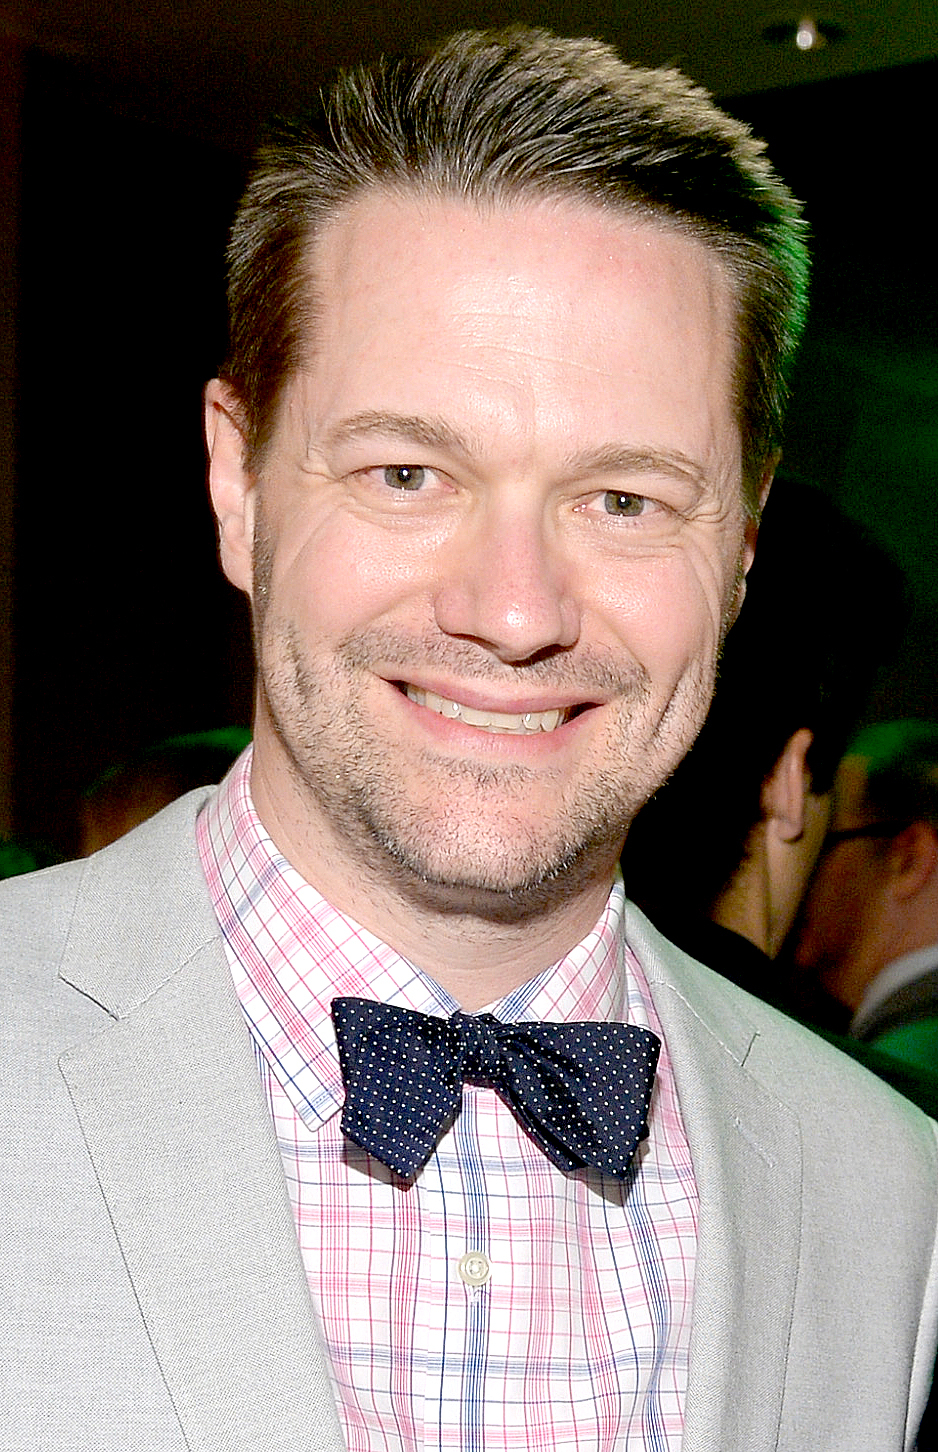 Puppeteer Matt Vogel attends the world premiere of Disney's "Muppets Most Wanted" after party at The Annex on March 11, 2014 in Hollywood, California.